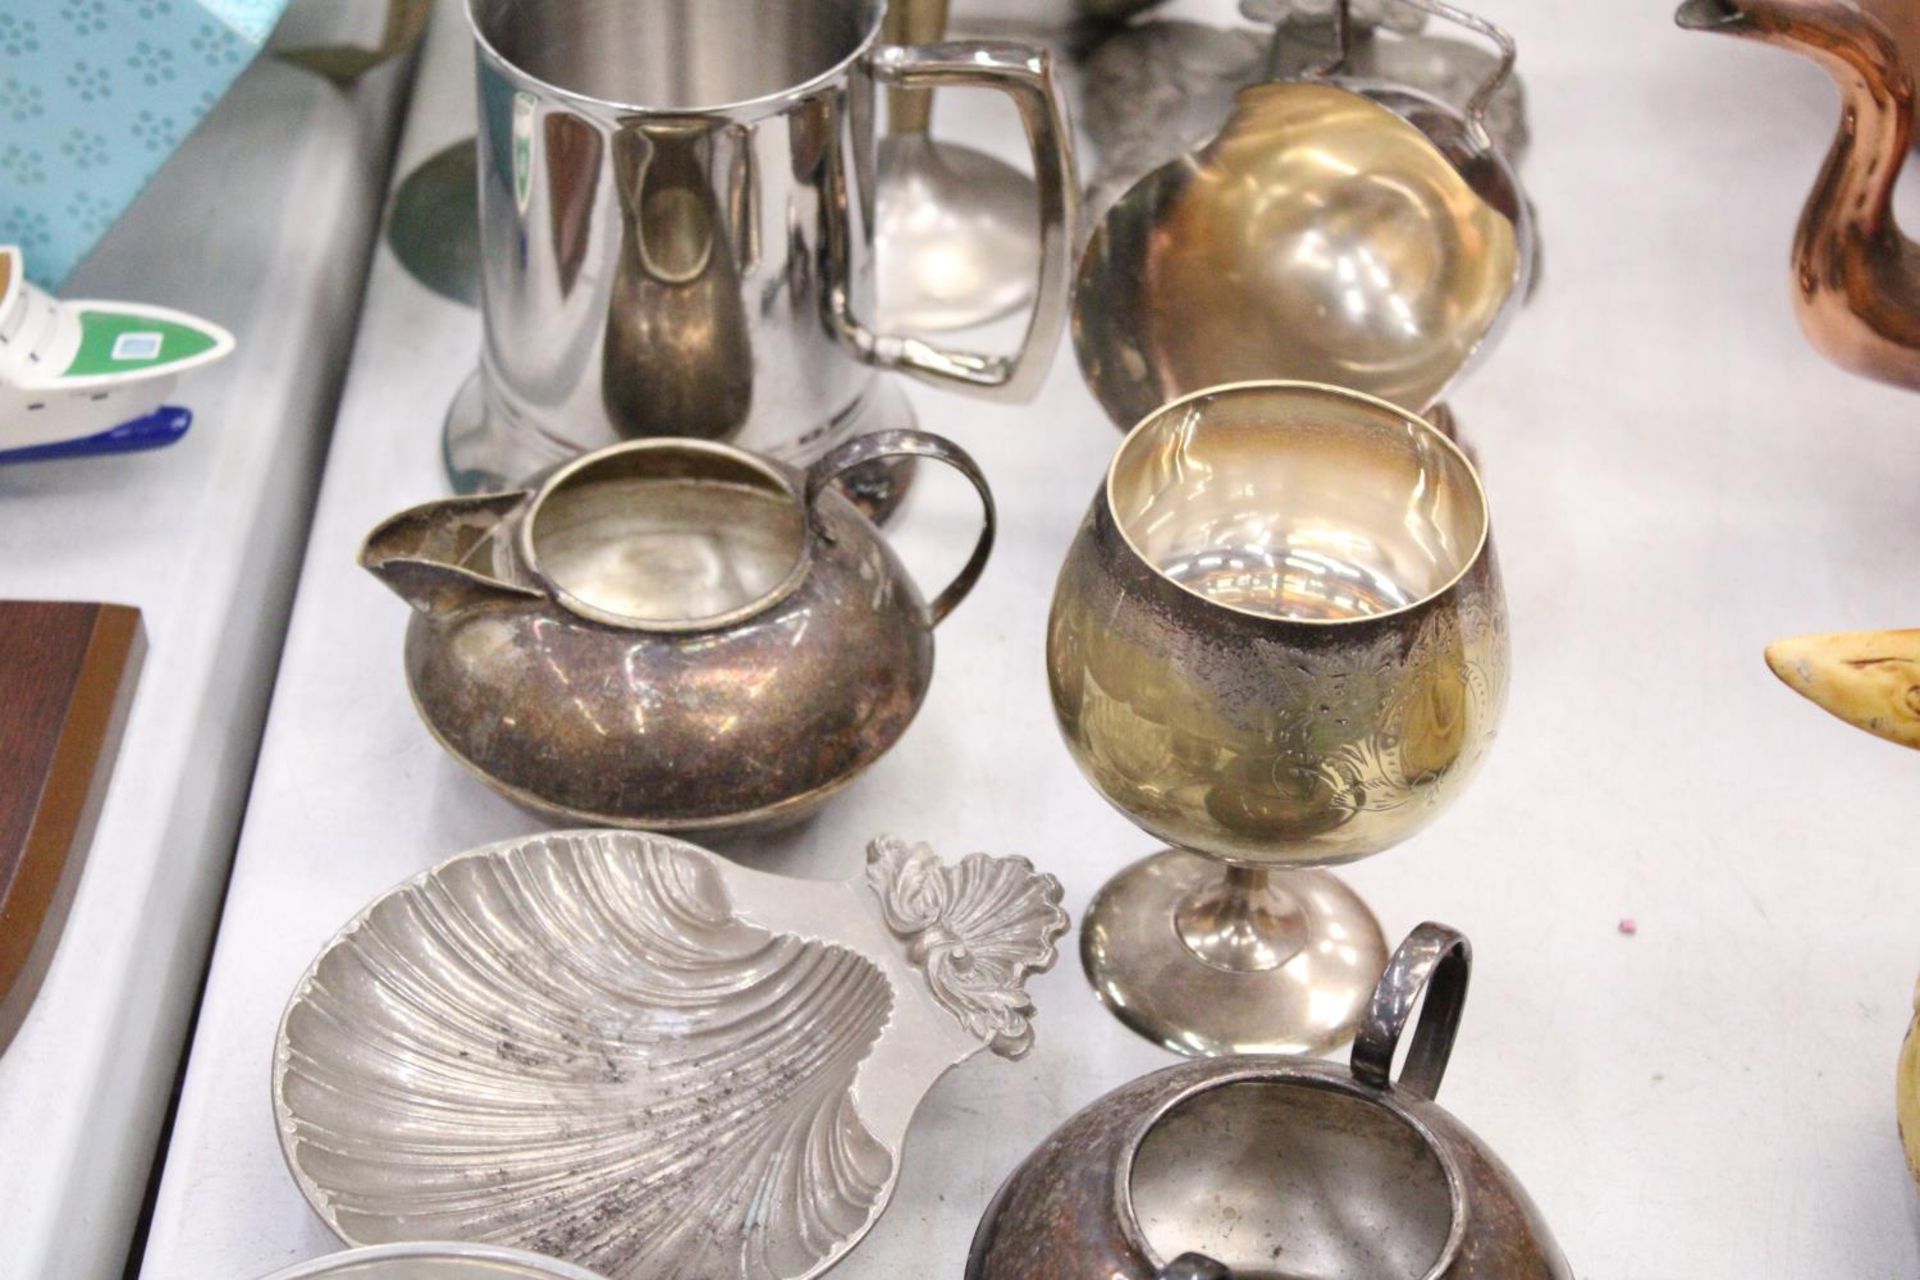 A LARGE QUANTITY OF SILVER PLATED ITEMS TO INCLUDE CANDLESTICKS, A KETTLE, A TANKARD, JUGS, BOWLS, - Image 3 of 6